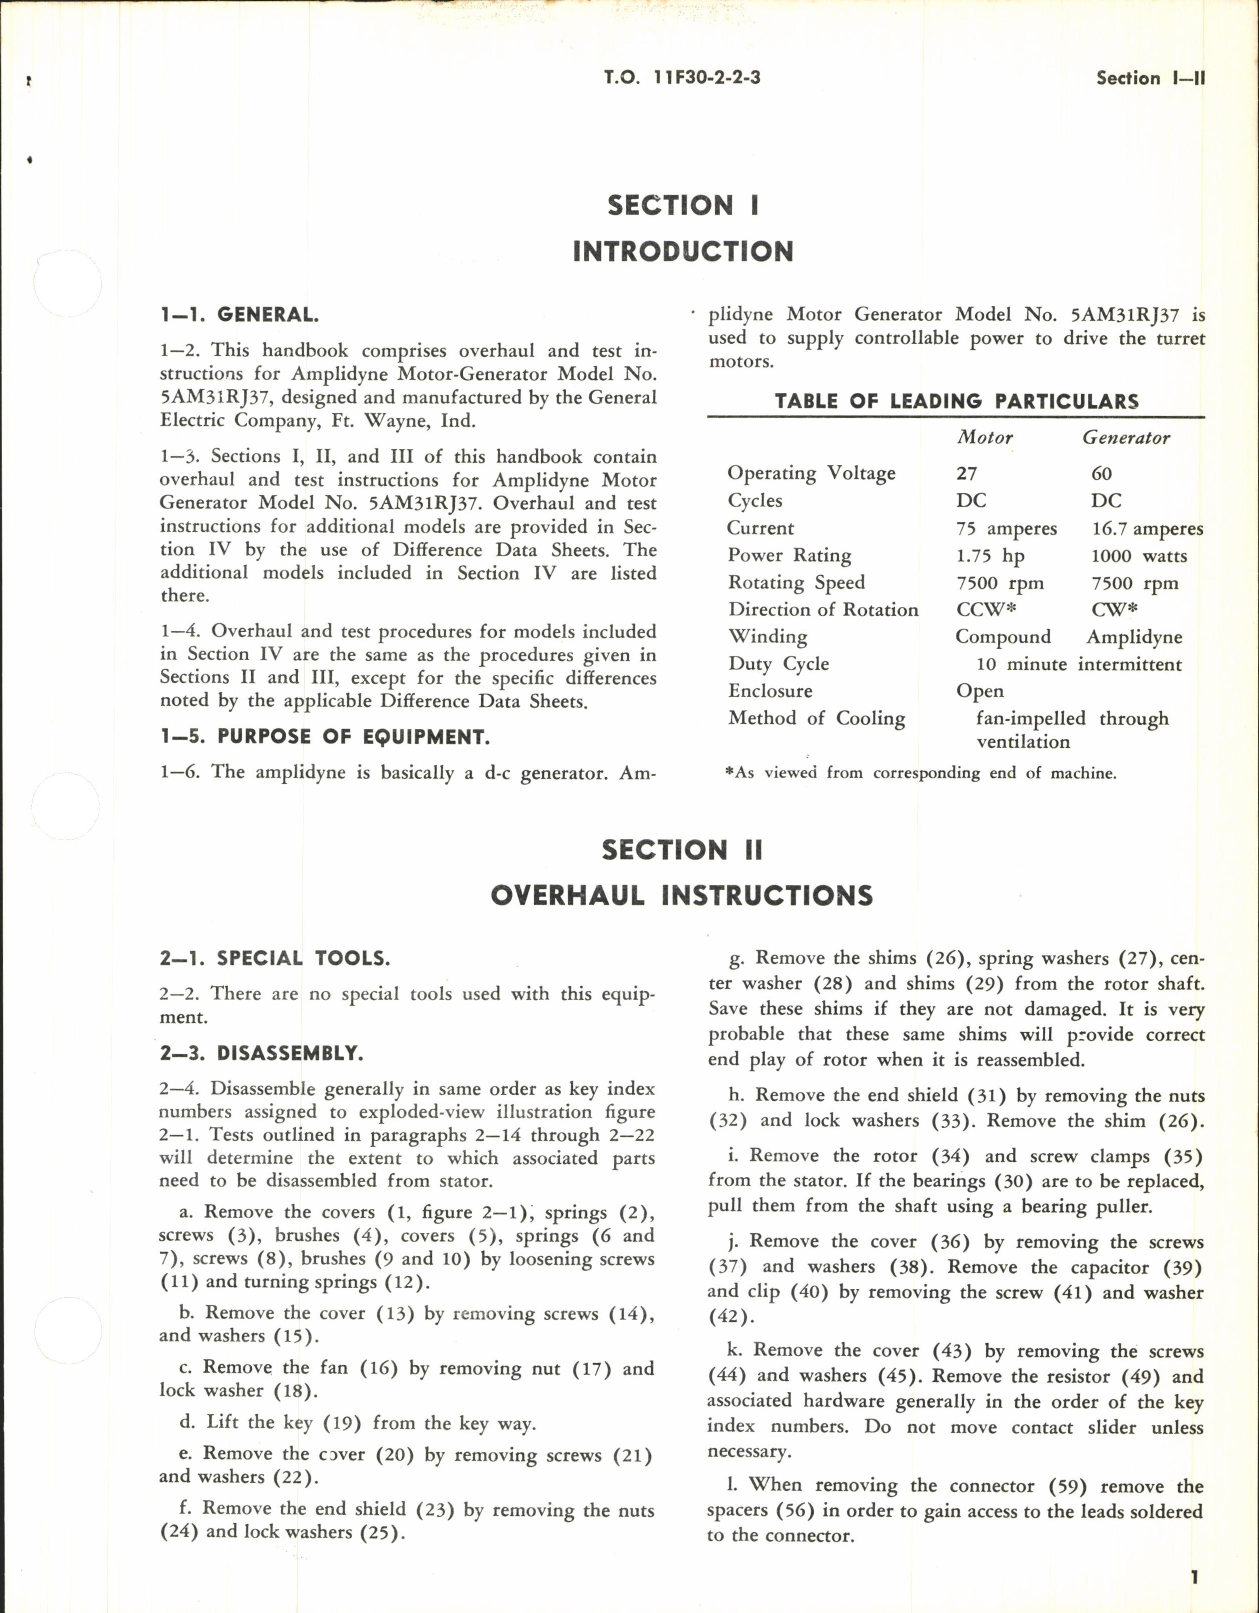 Sample page 5 from AirCorps Library document: Overhaul Instructions for Amplidyne Motor-Generator Model Nos. 5AM31RJ37 and 5AM31RJ55